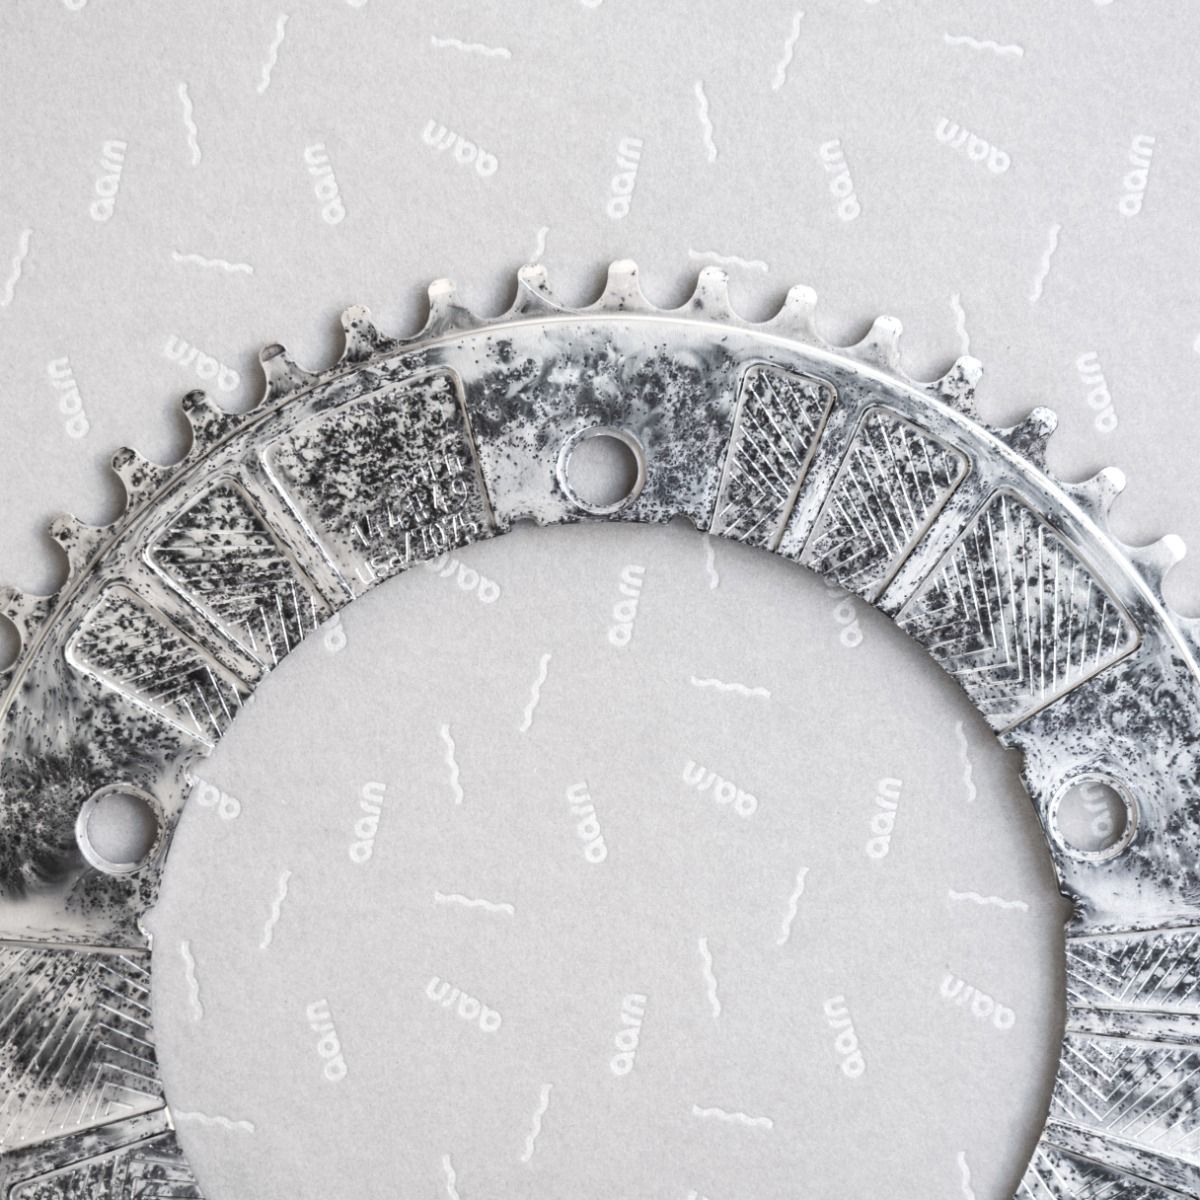 *AARN* 15-panel track chainring (acid contrast)